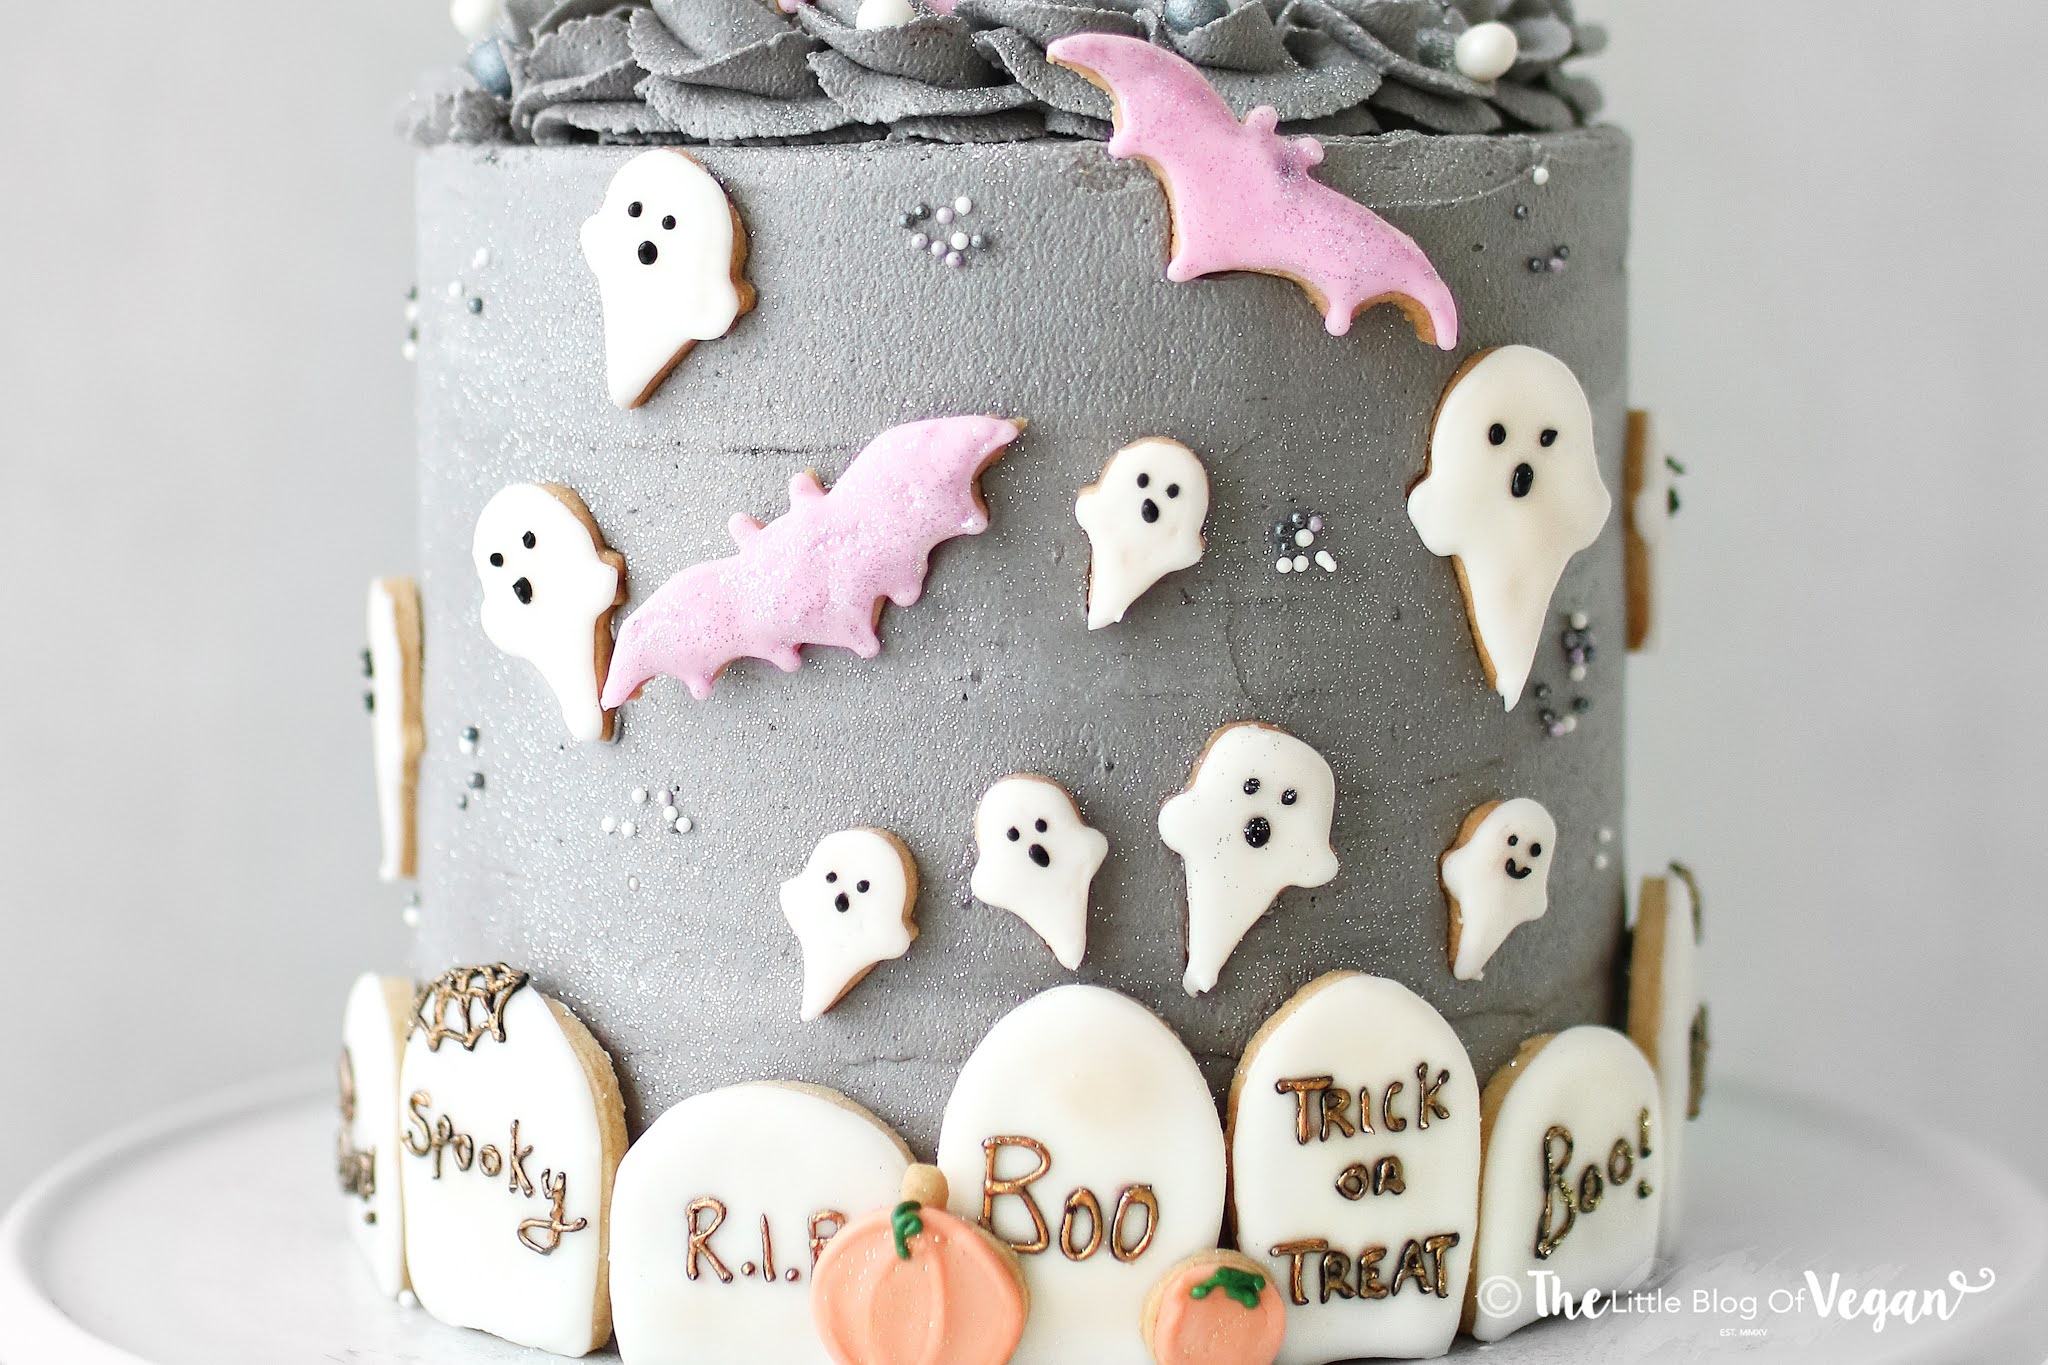 👻 From Elegant to Terrifying: The Ultimate Guide to Halloween Cakes 👻